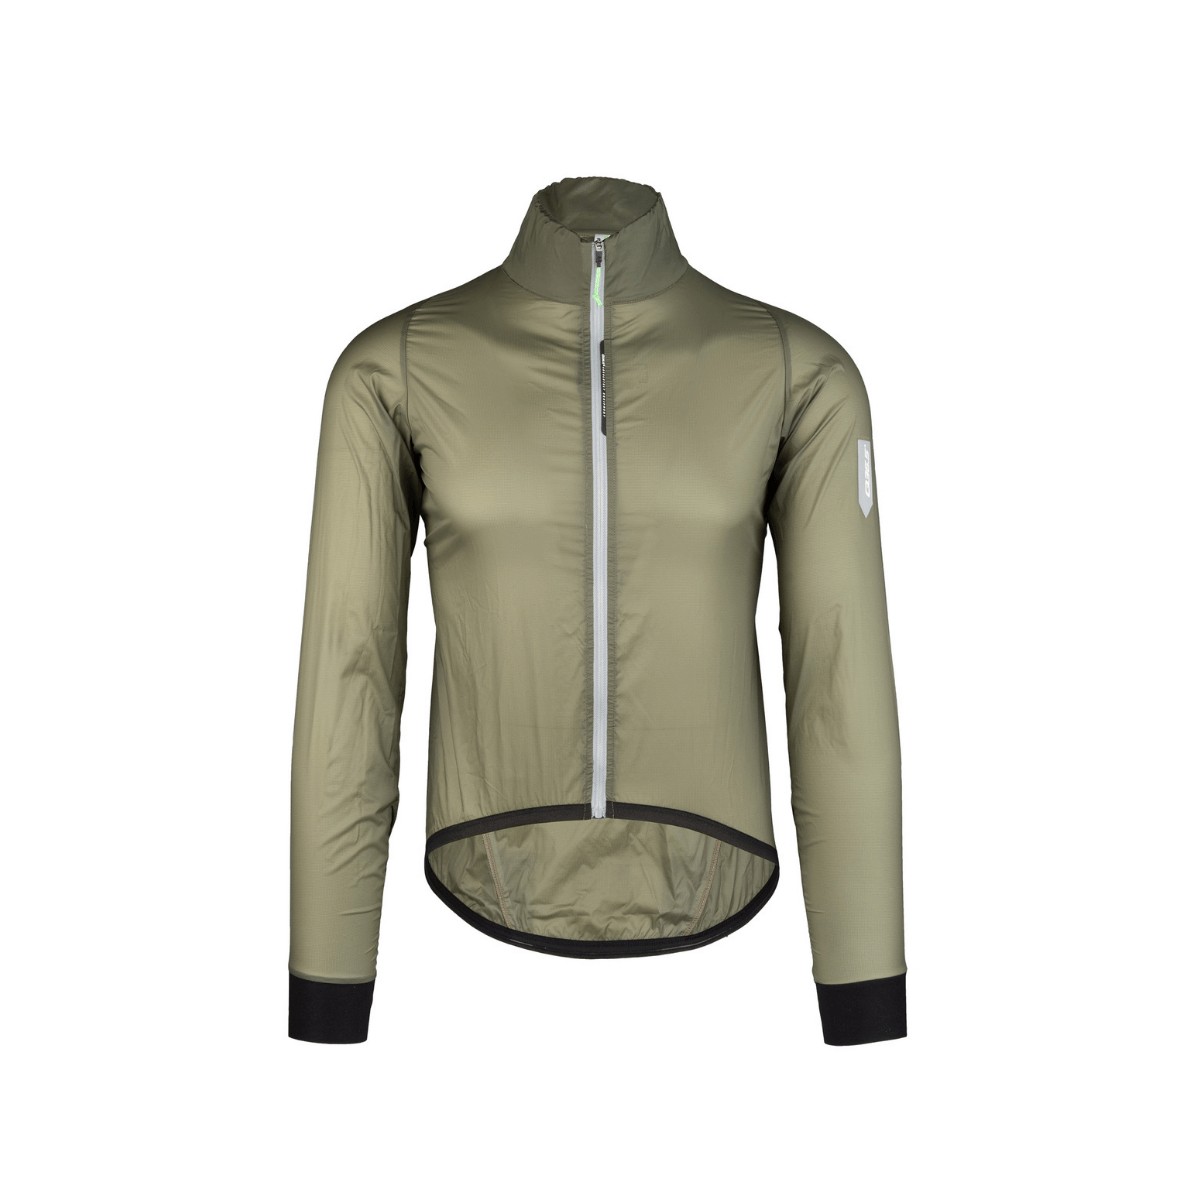 Veste coupe-vent Q36.5 AIR-Shell vert olive, Taille S